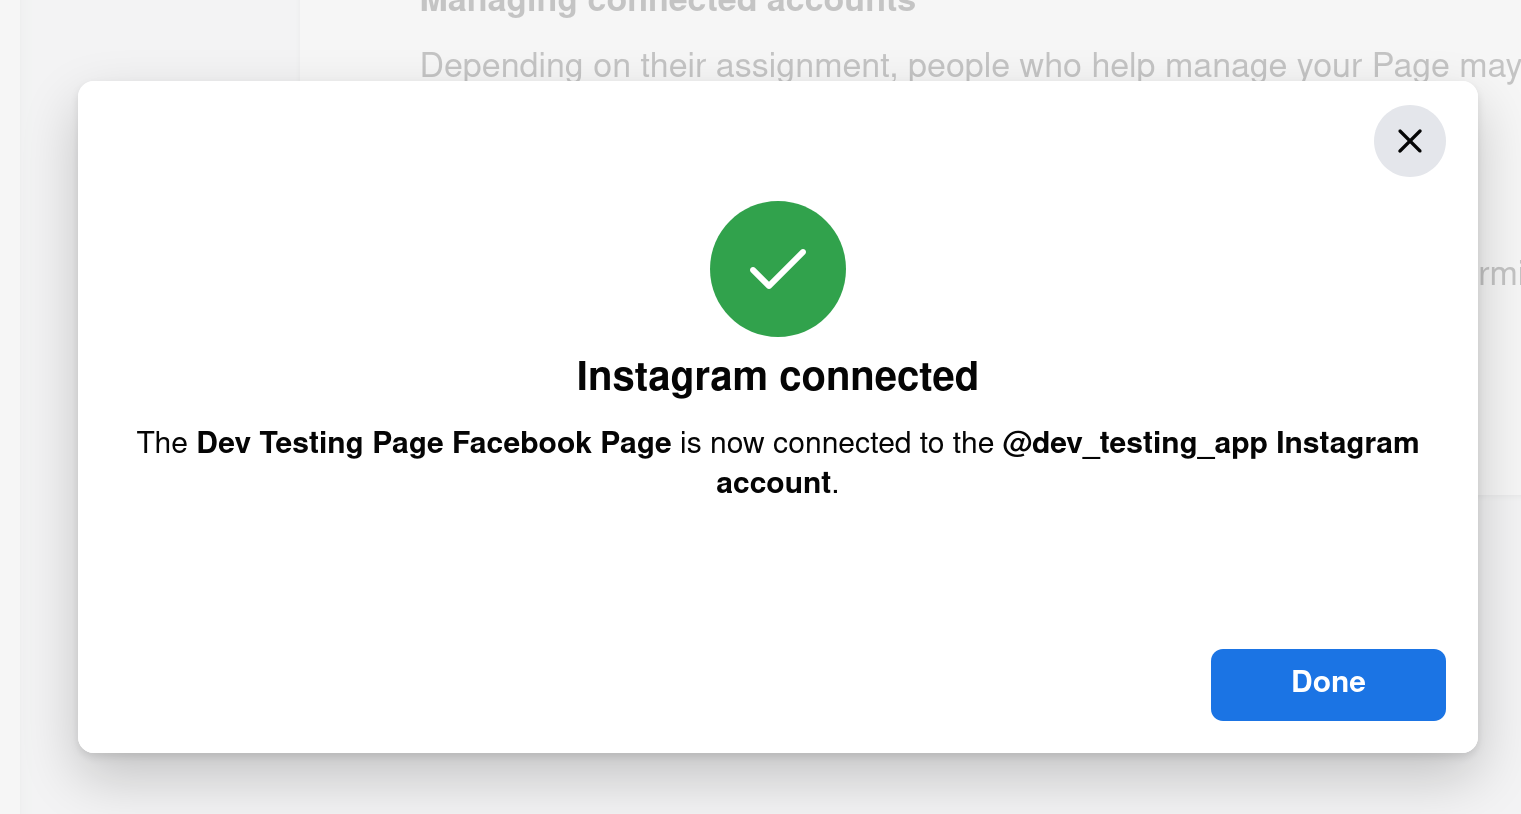 Success message: Instagram connected